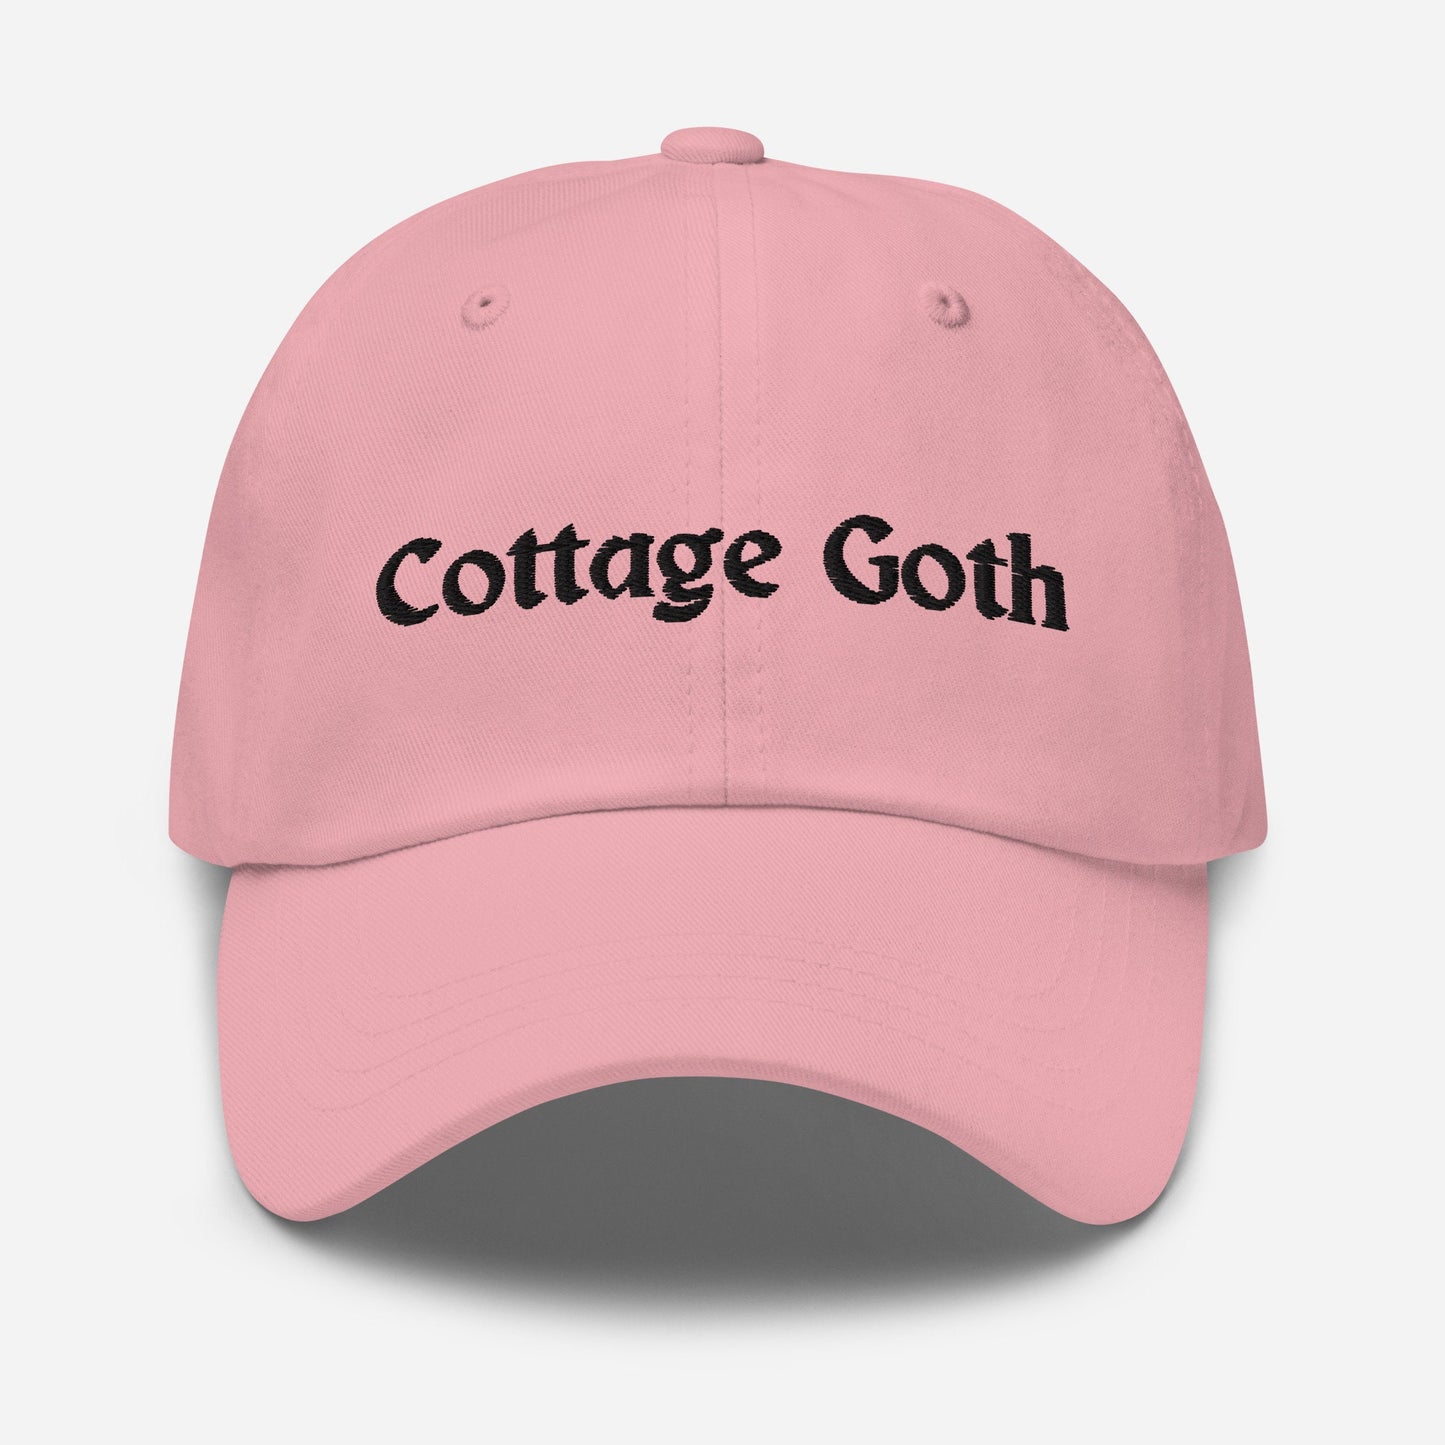 Cottage Dad Hat - Gift for Outdoorsy Goths Who Love to Camp - Embroidered Cotton Cap